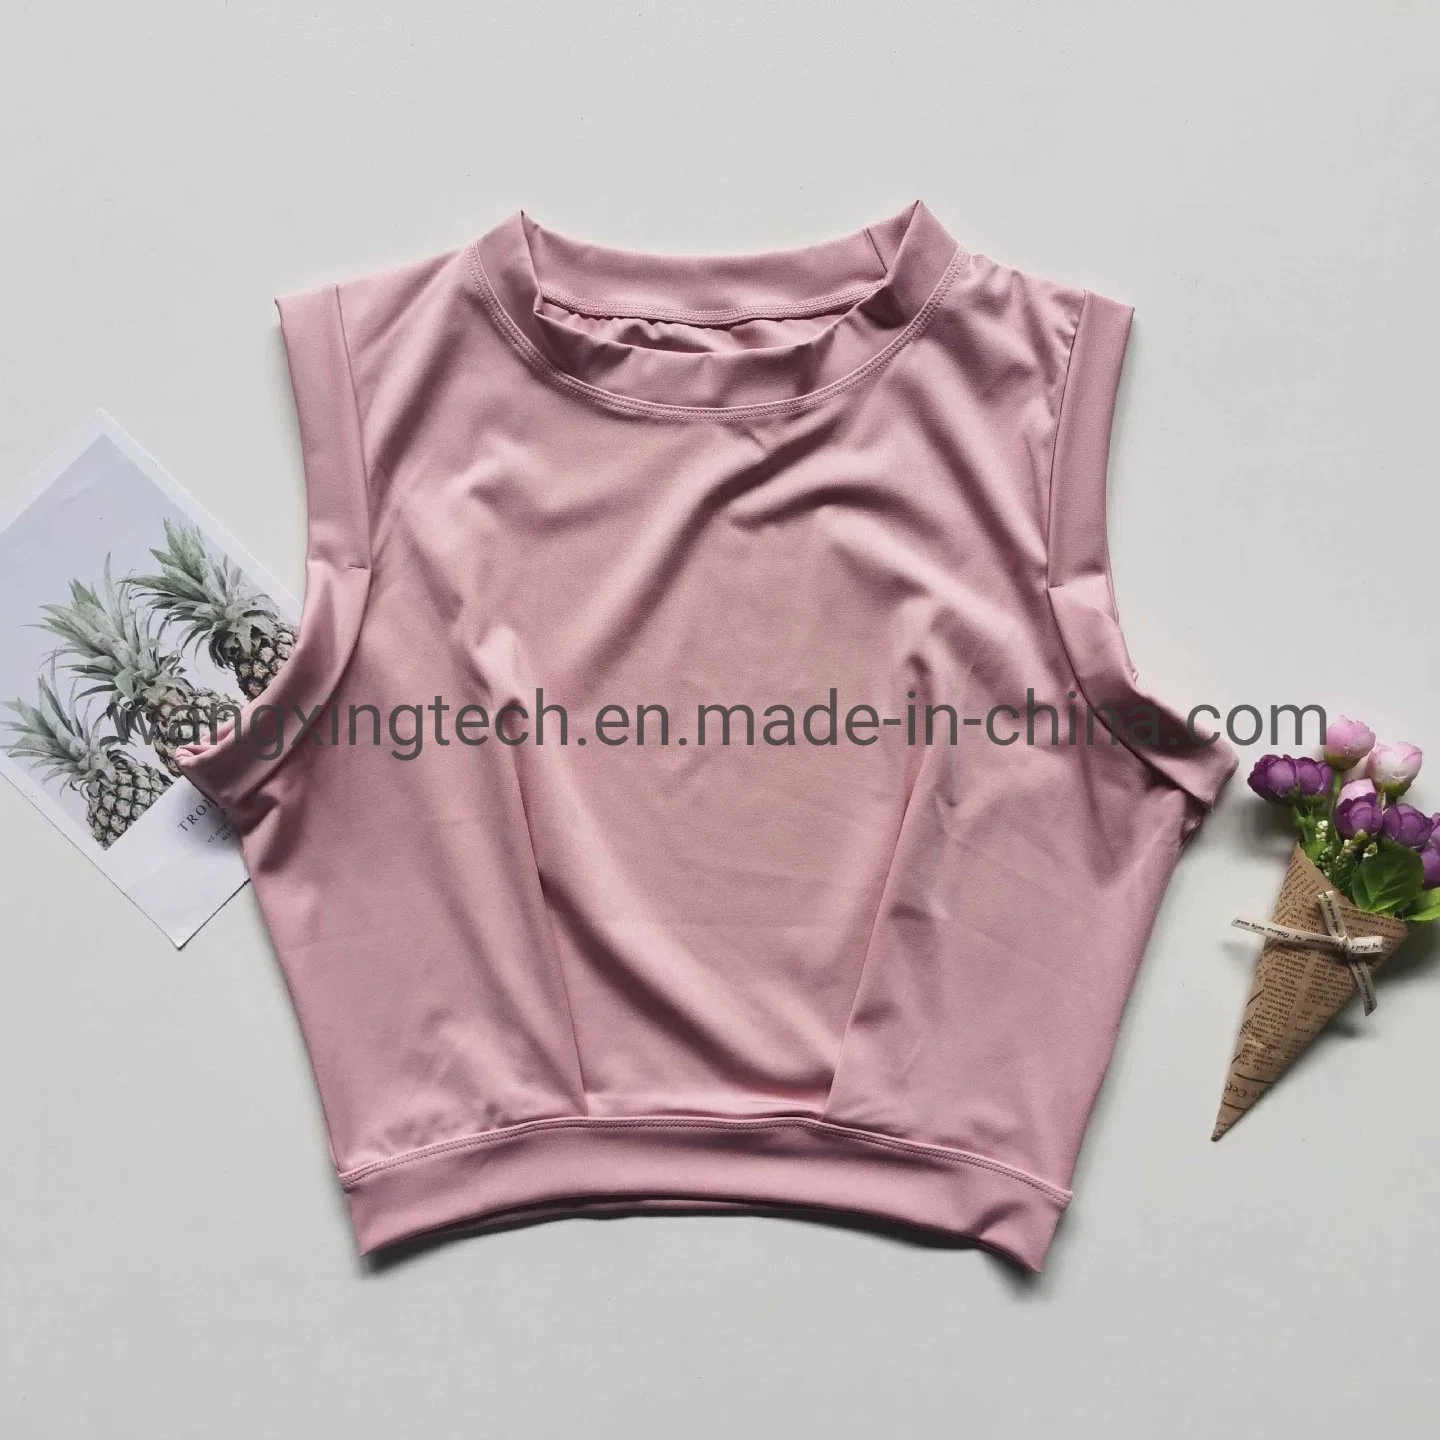 Fashion Crop Top Athletic Shirts for Women Cute Sleeveless Yoga Tops Running Gym Workout Shirts